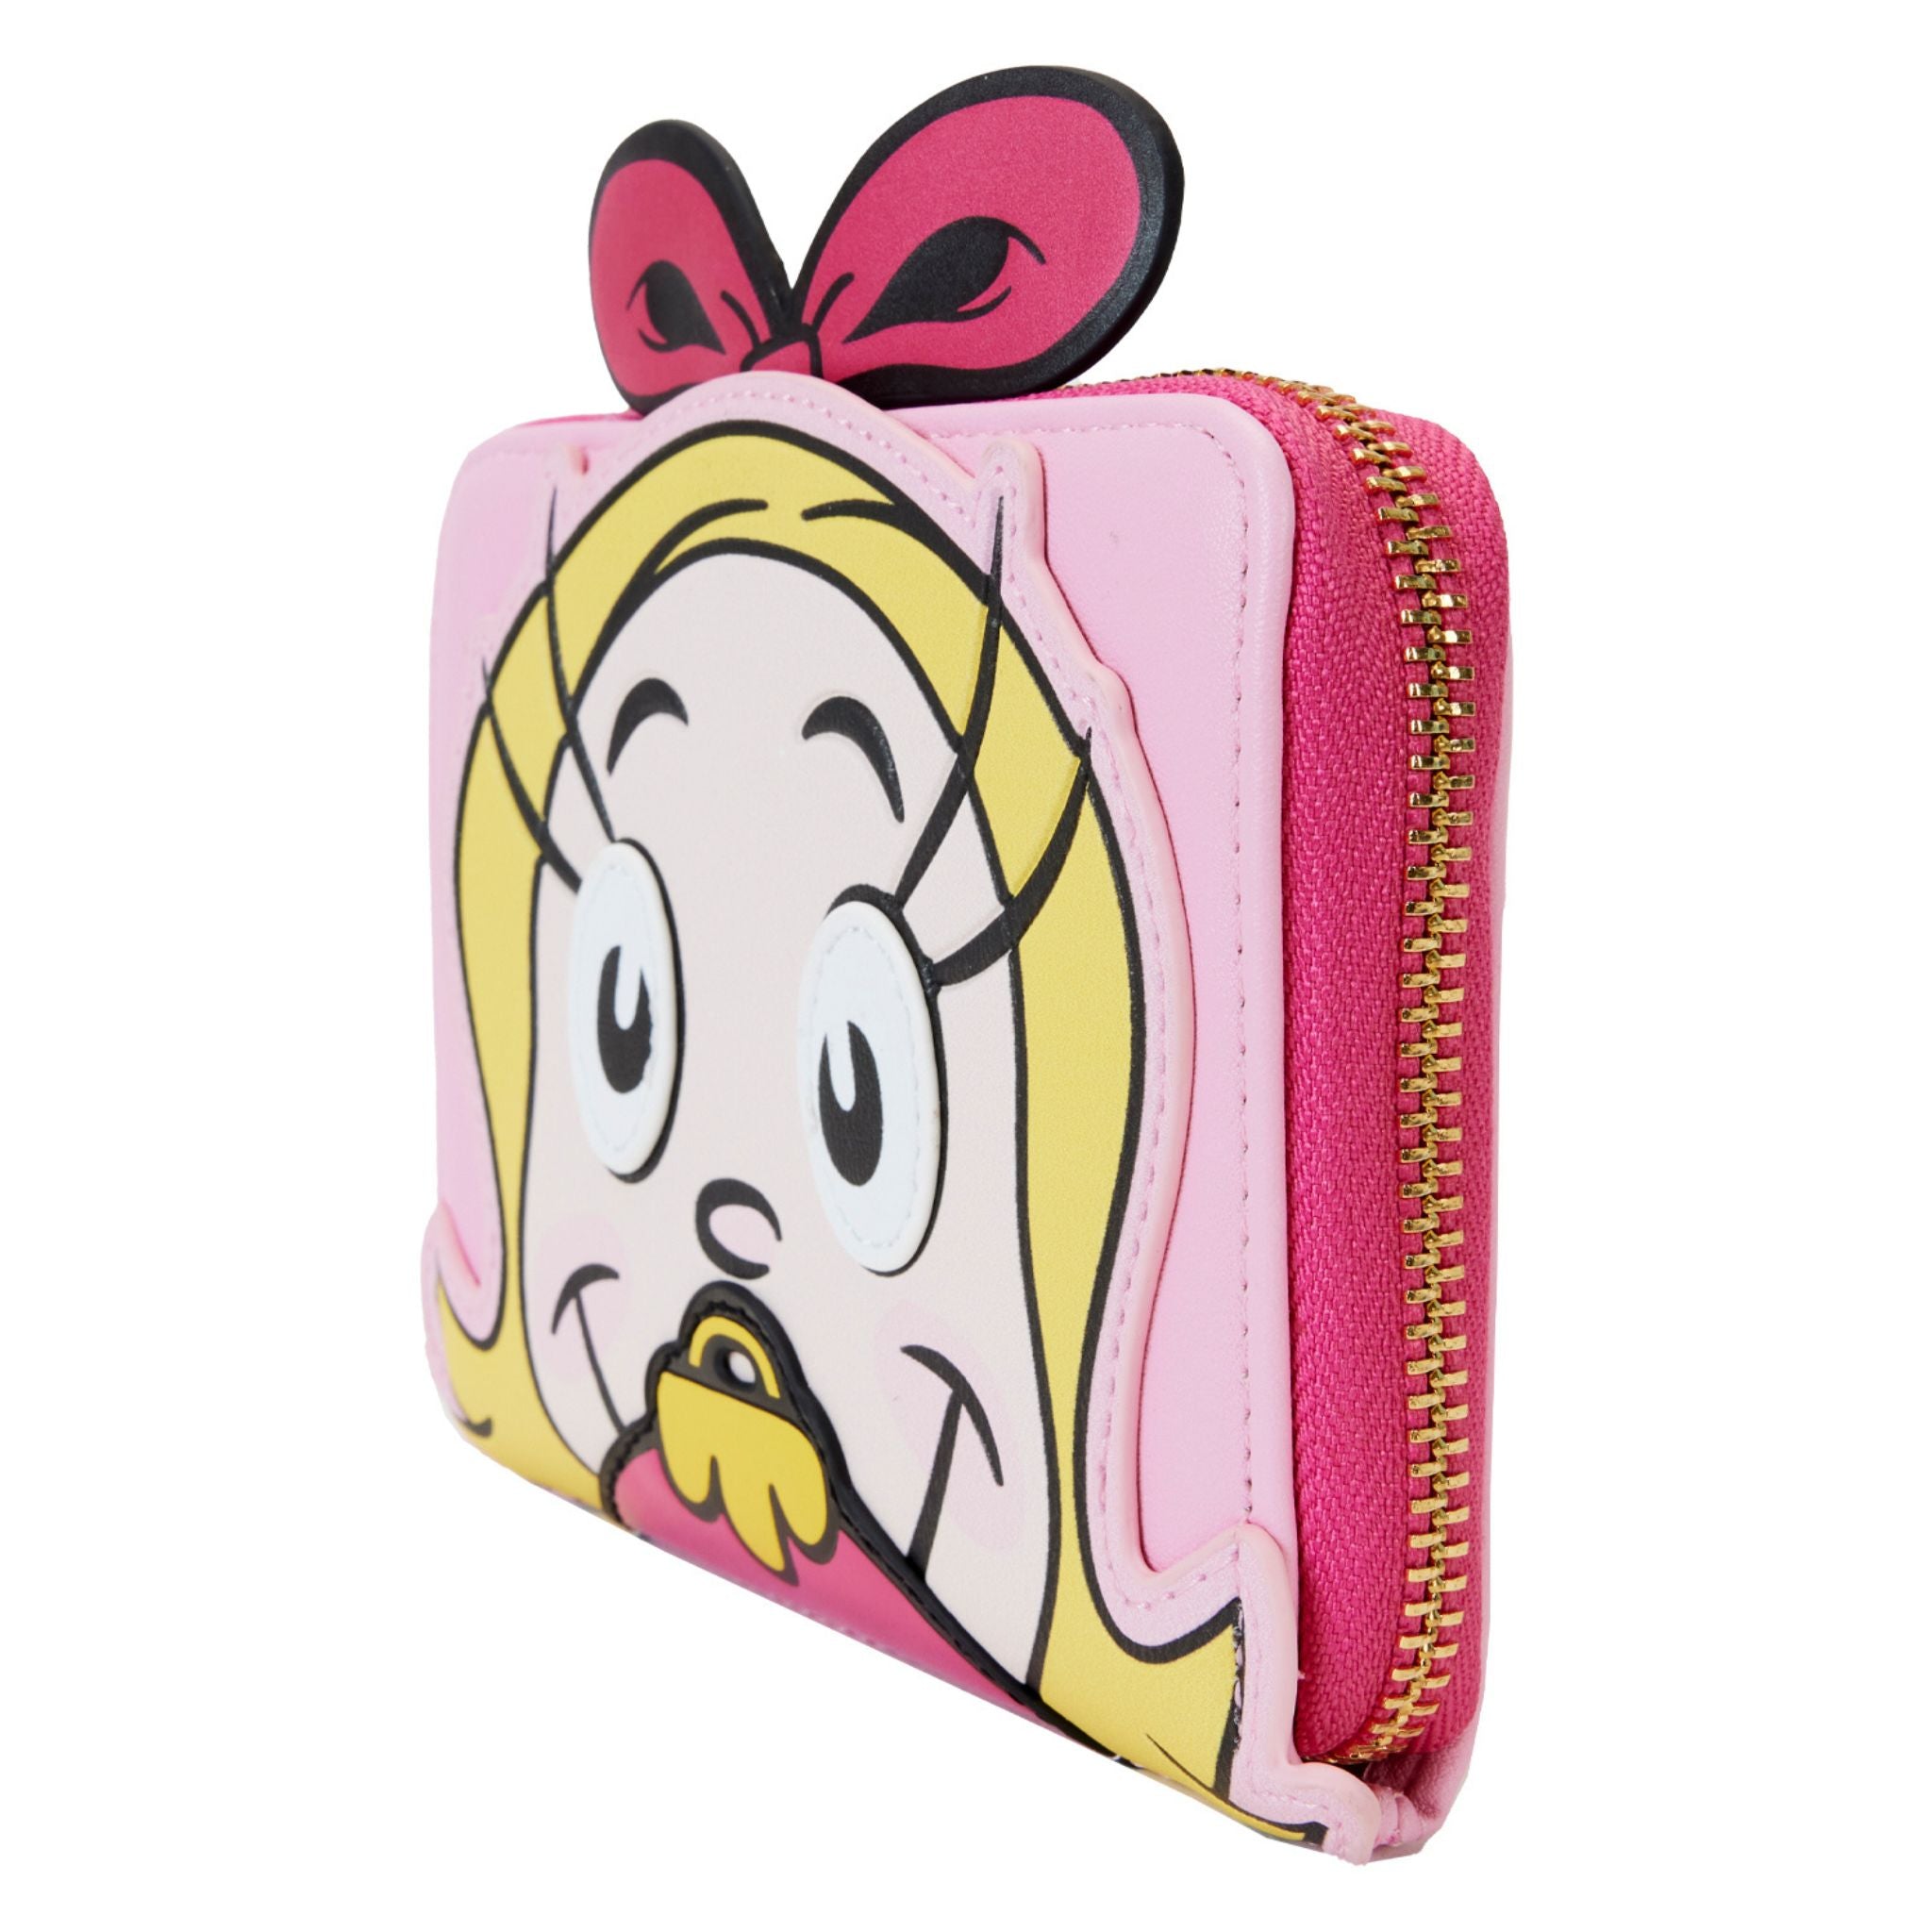 Loungefly Dr Seuss Cindy Lou Who Cosplay Zip Around Wallet